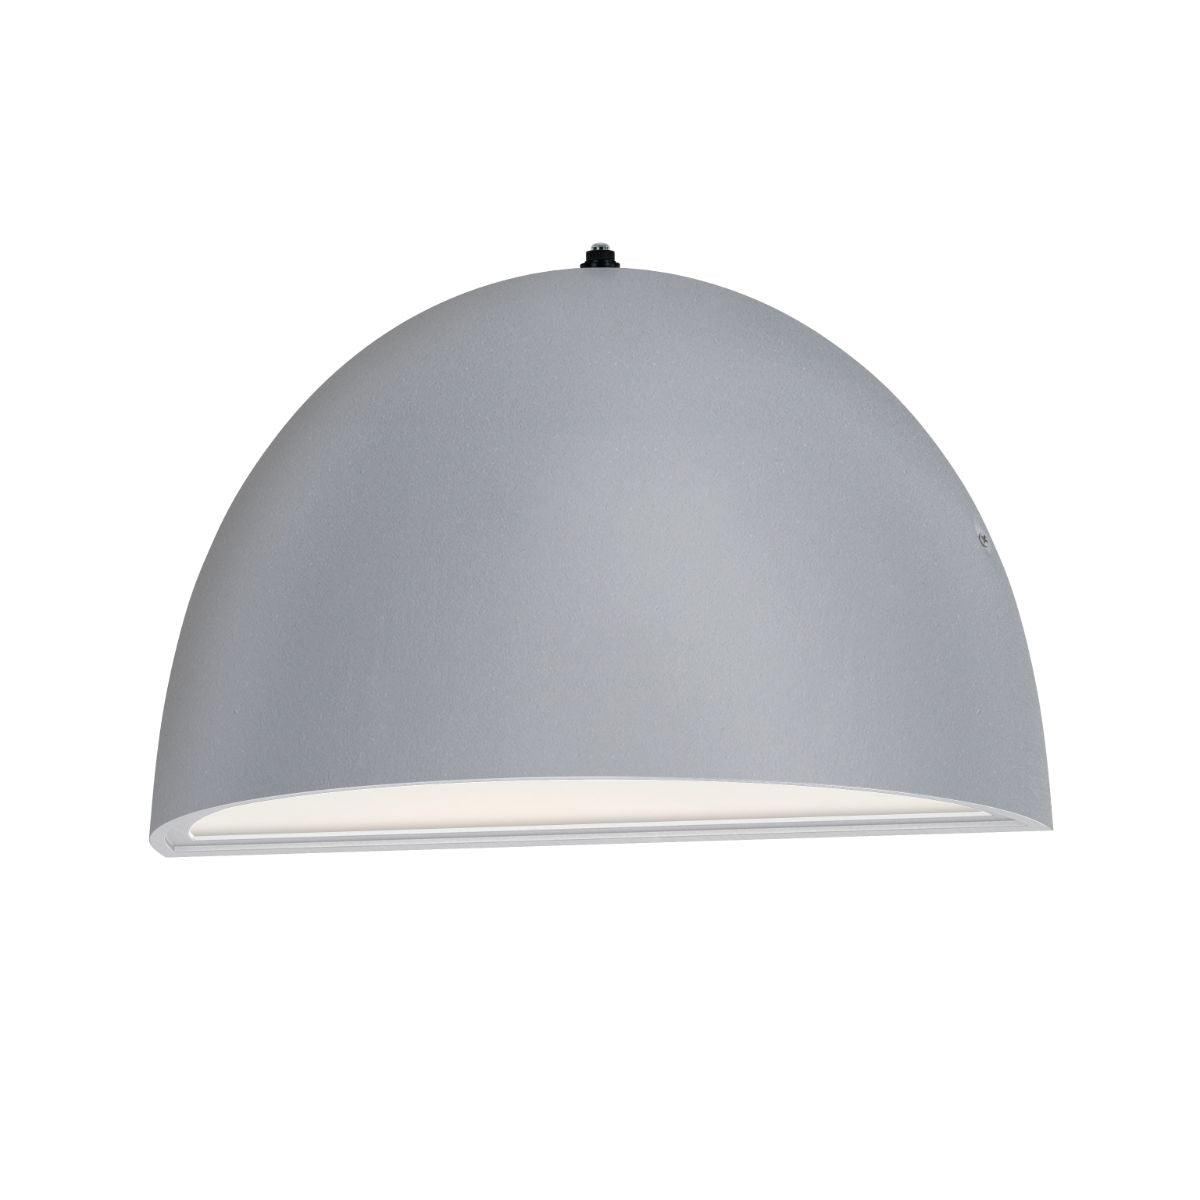 Pathfinder 7 In. LED Outdoor Wall Sconce